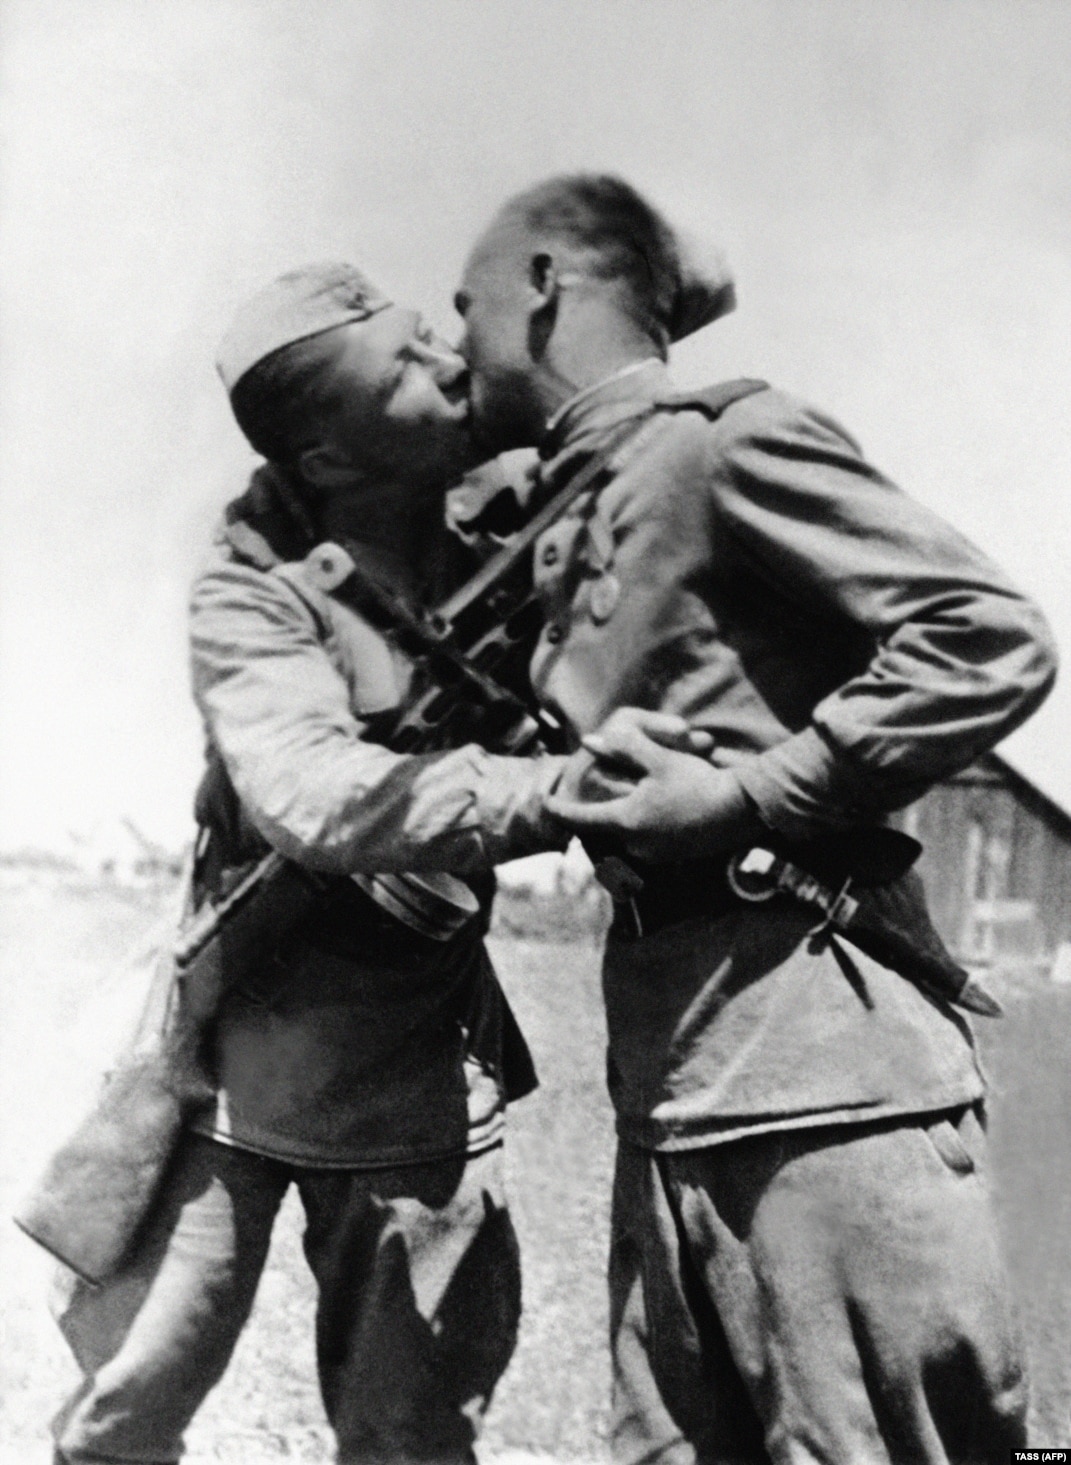 The Soviet Kiss Gone But Mostly Not Missed